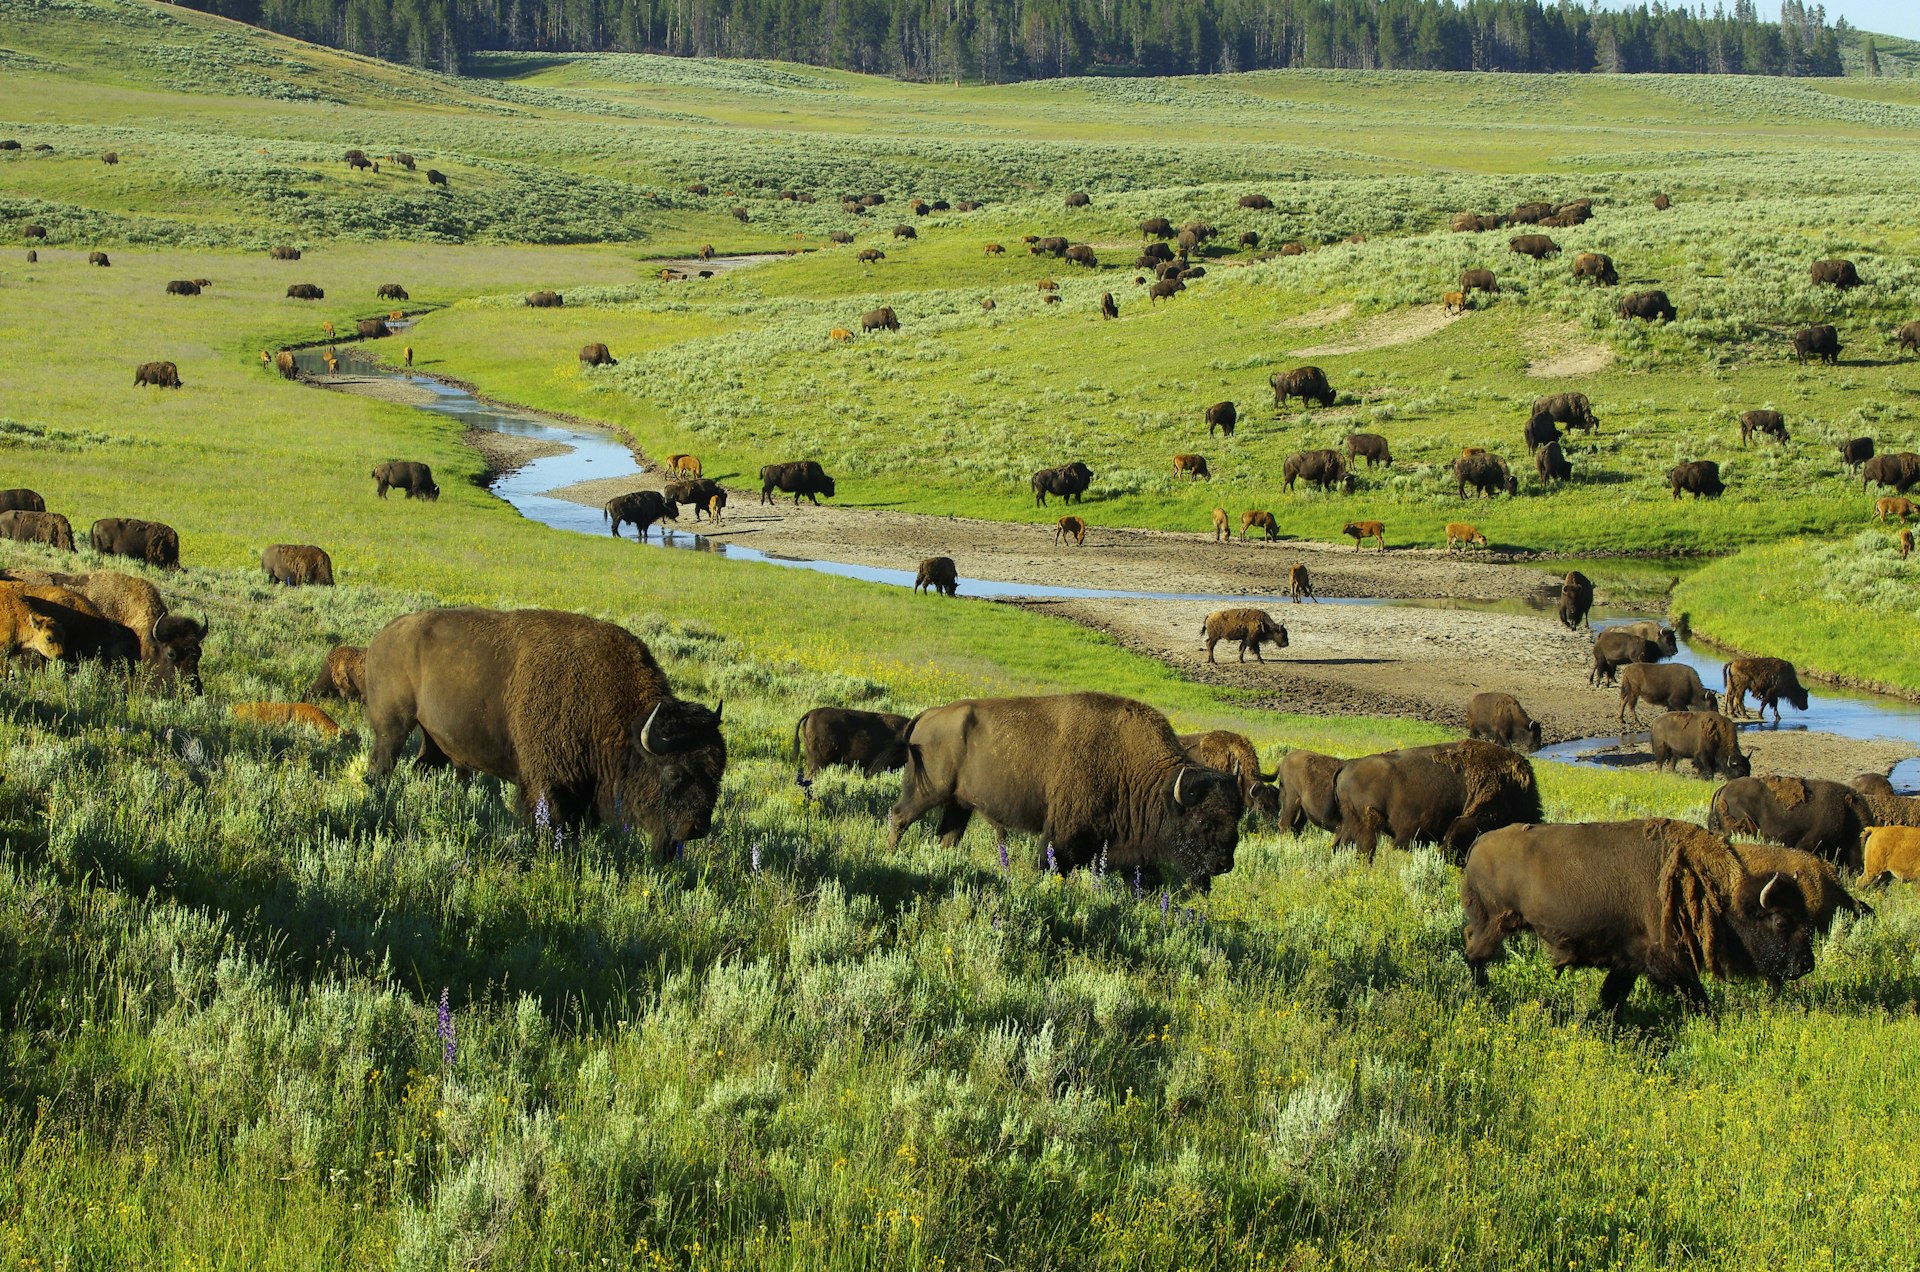 A field of Bison in Yellowstone National Park